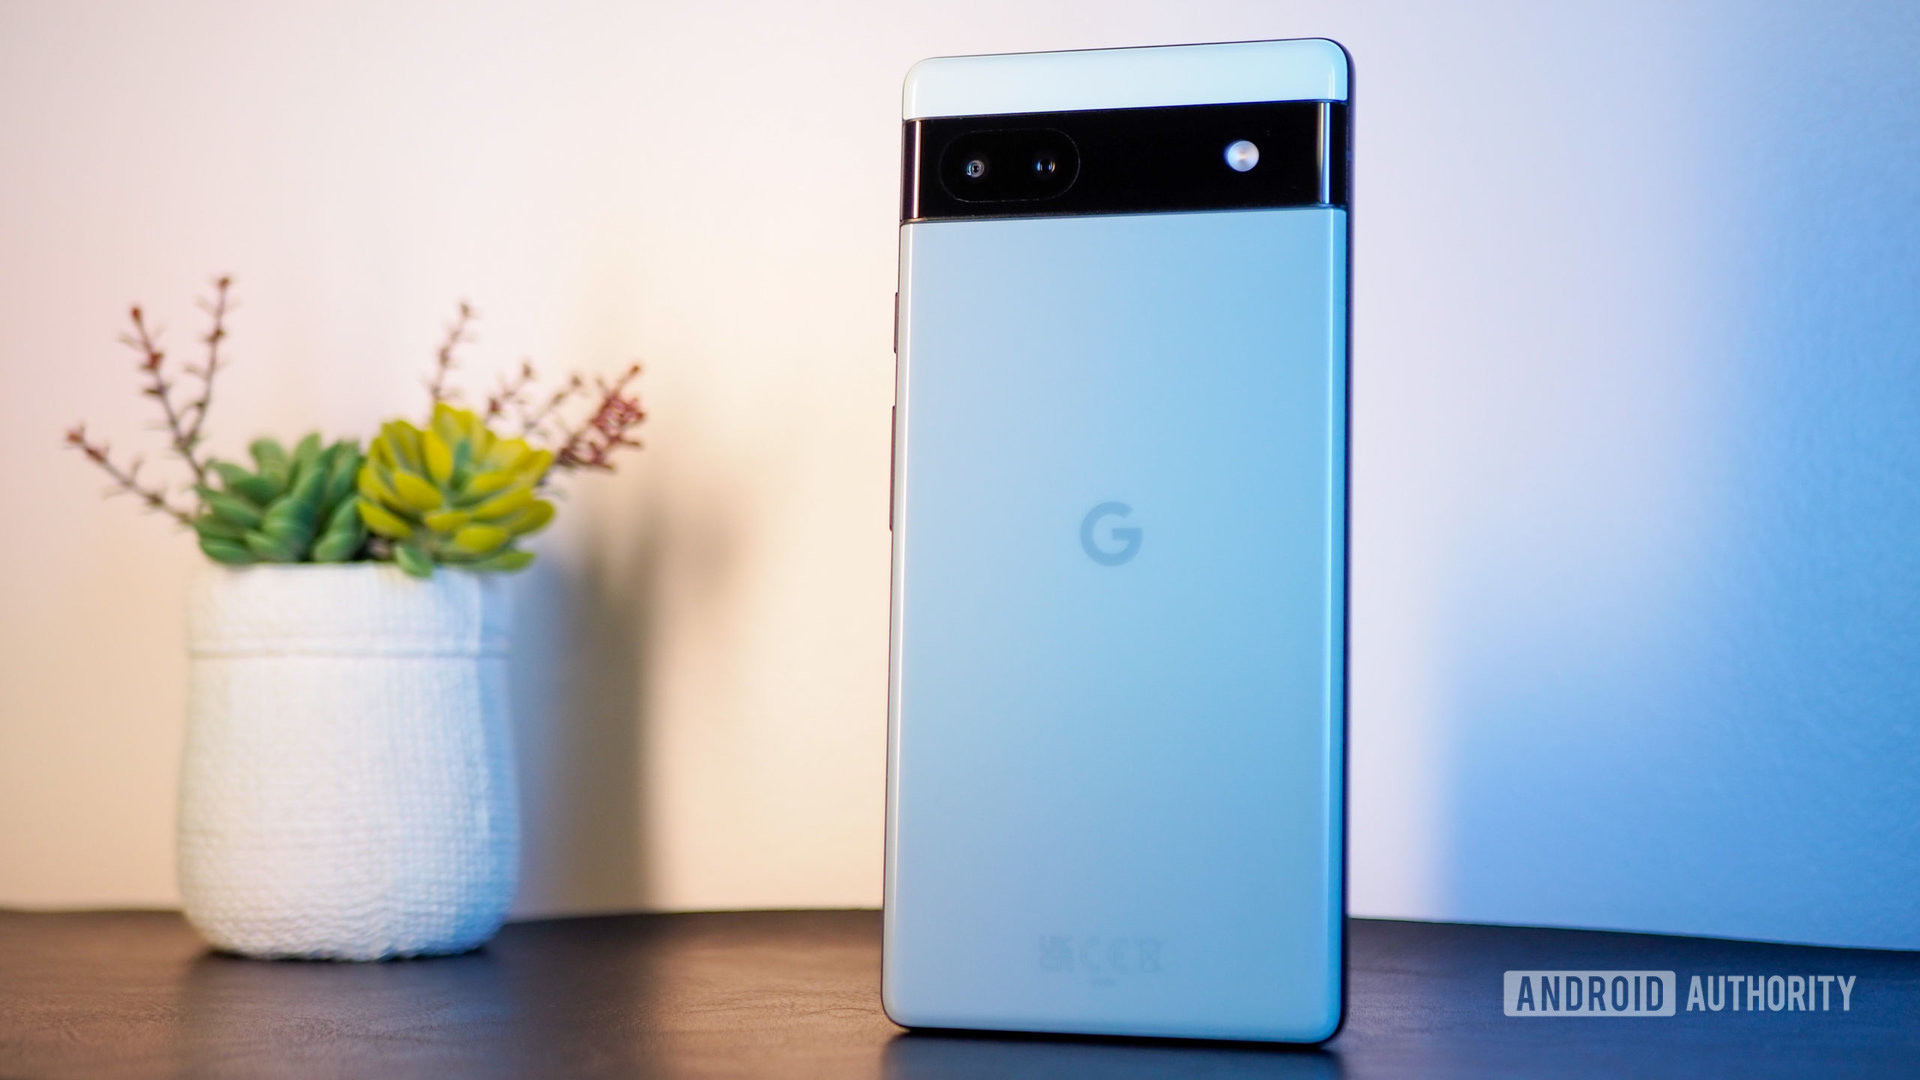 Google Pixel 6a in Sage color, seen from the back - The best phones for seniors